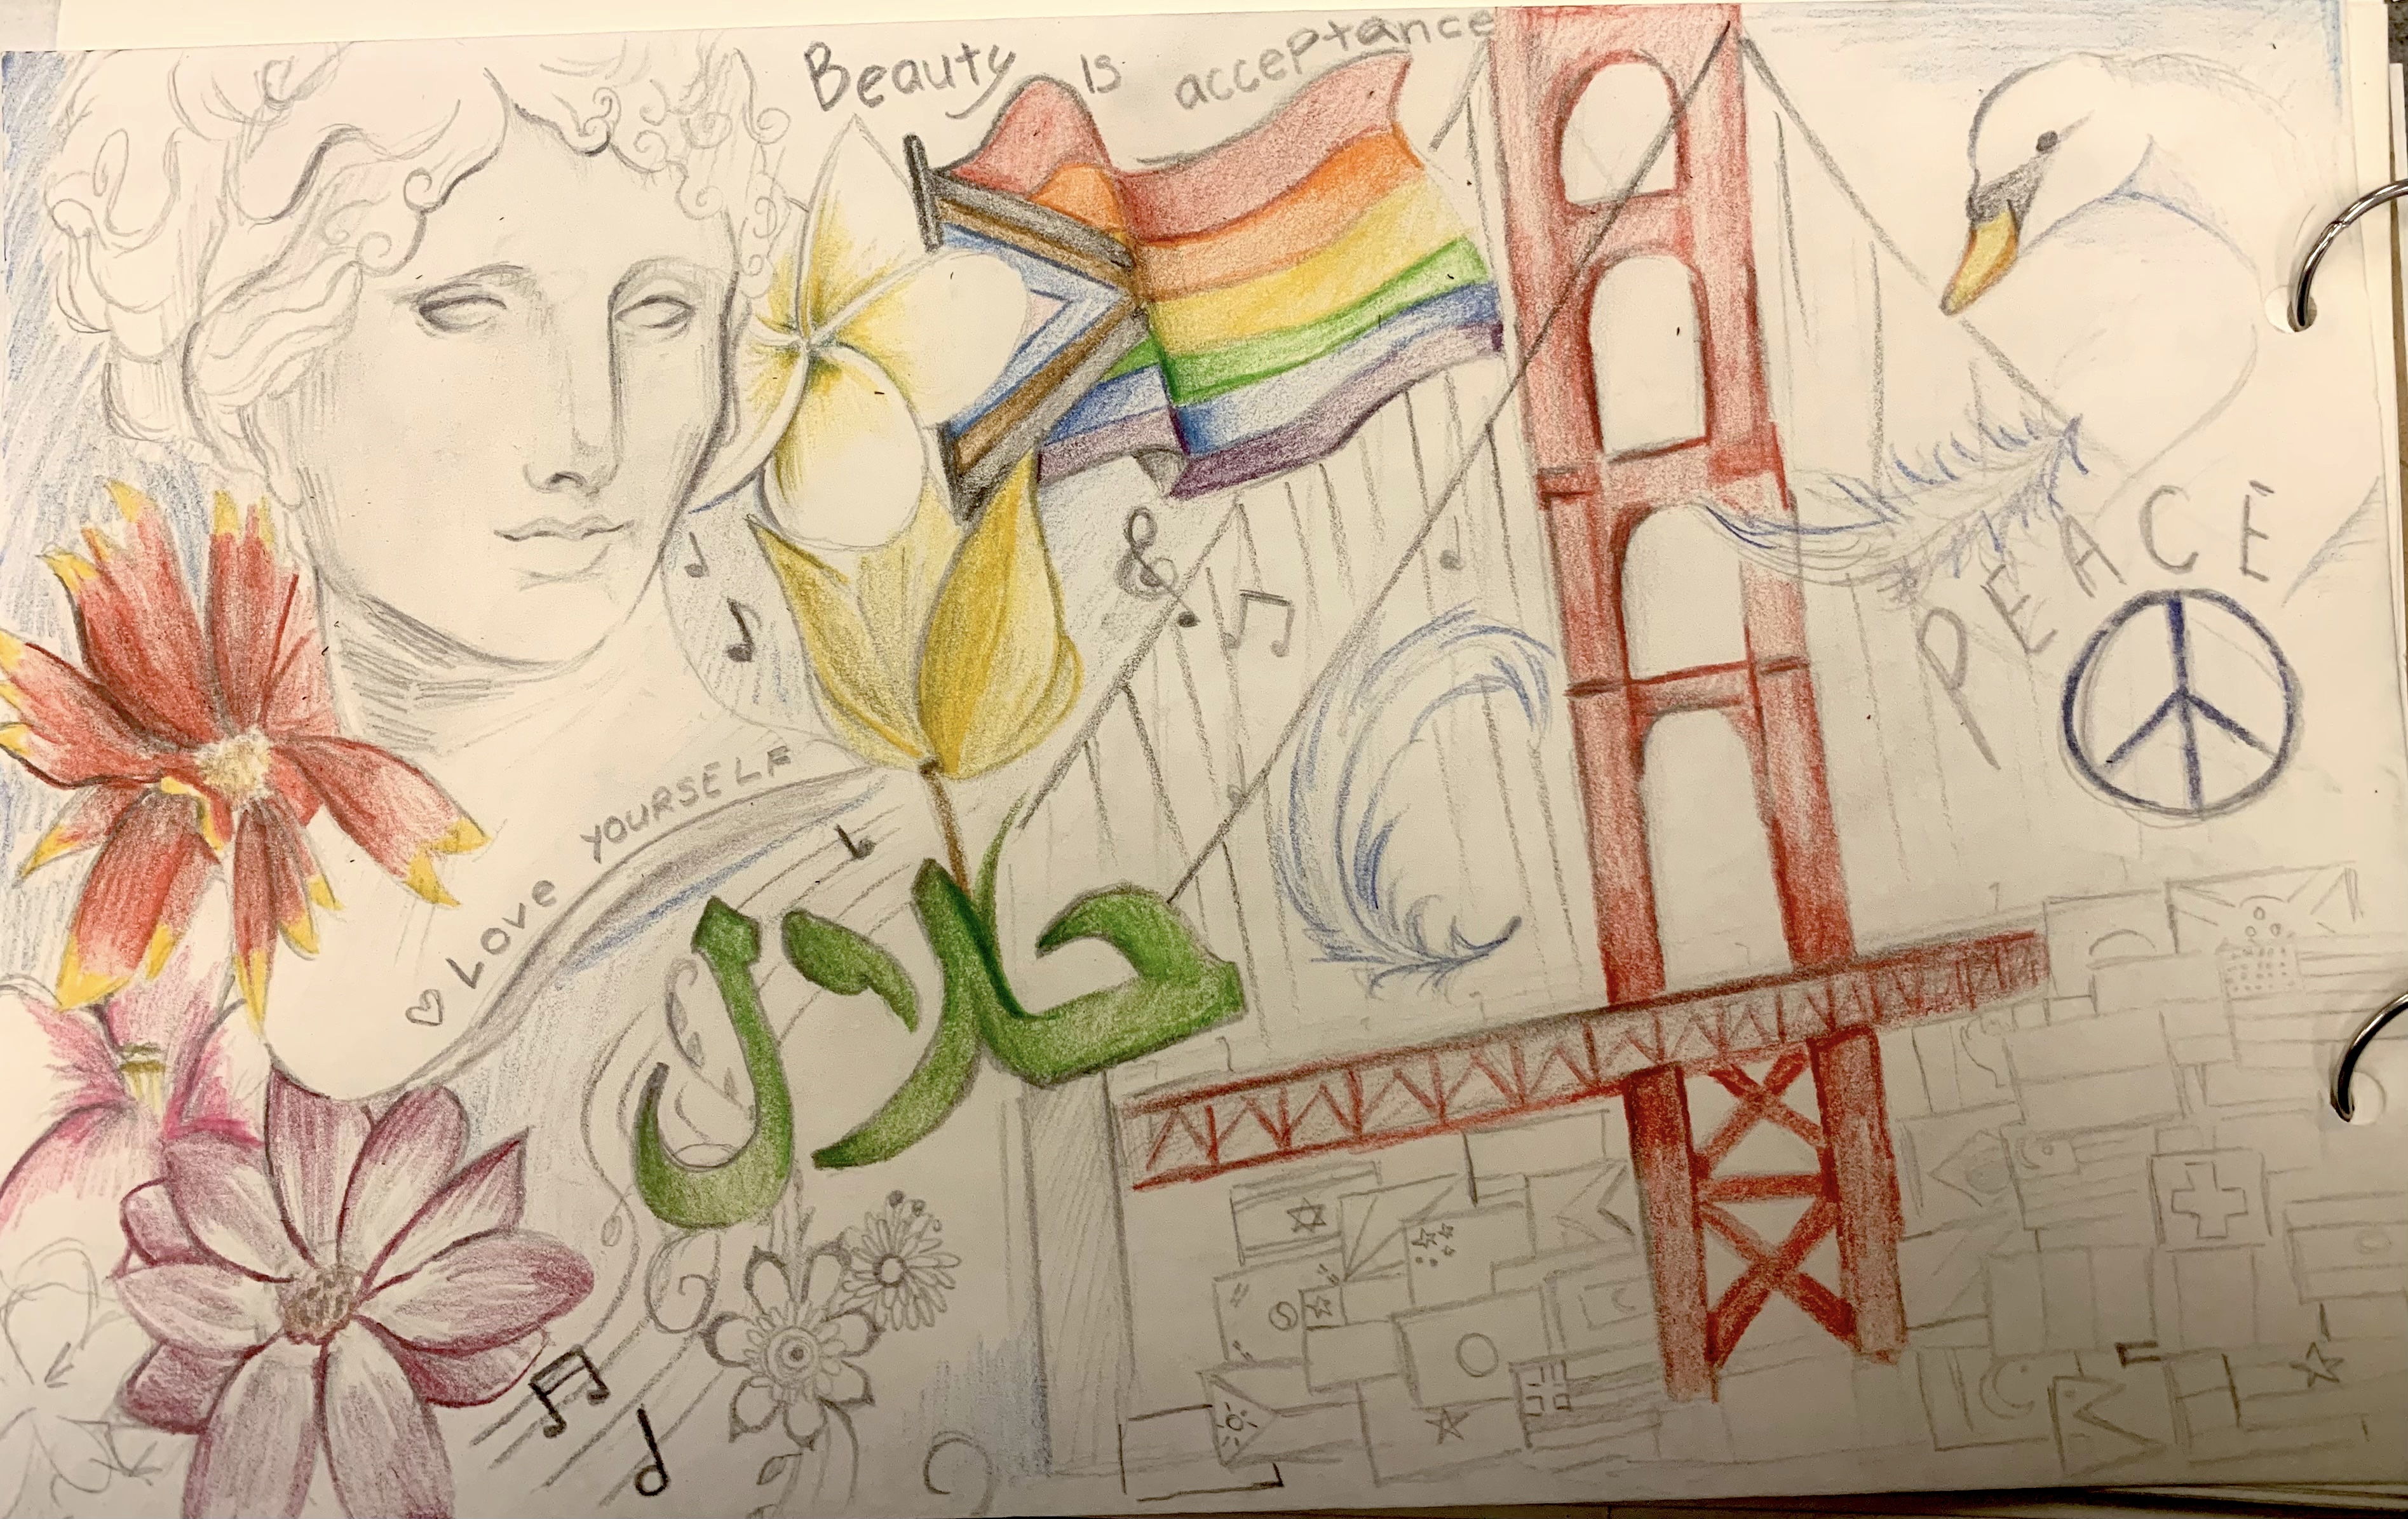 colored pencil drawing of a roman-looking face, flowers, golden gate bridge, feathers, a peace sign, and small flags from different countries